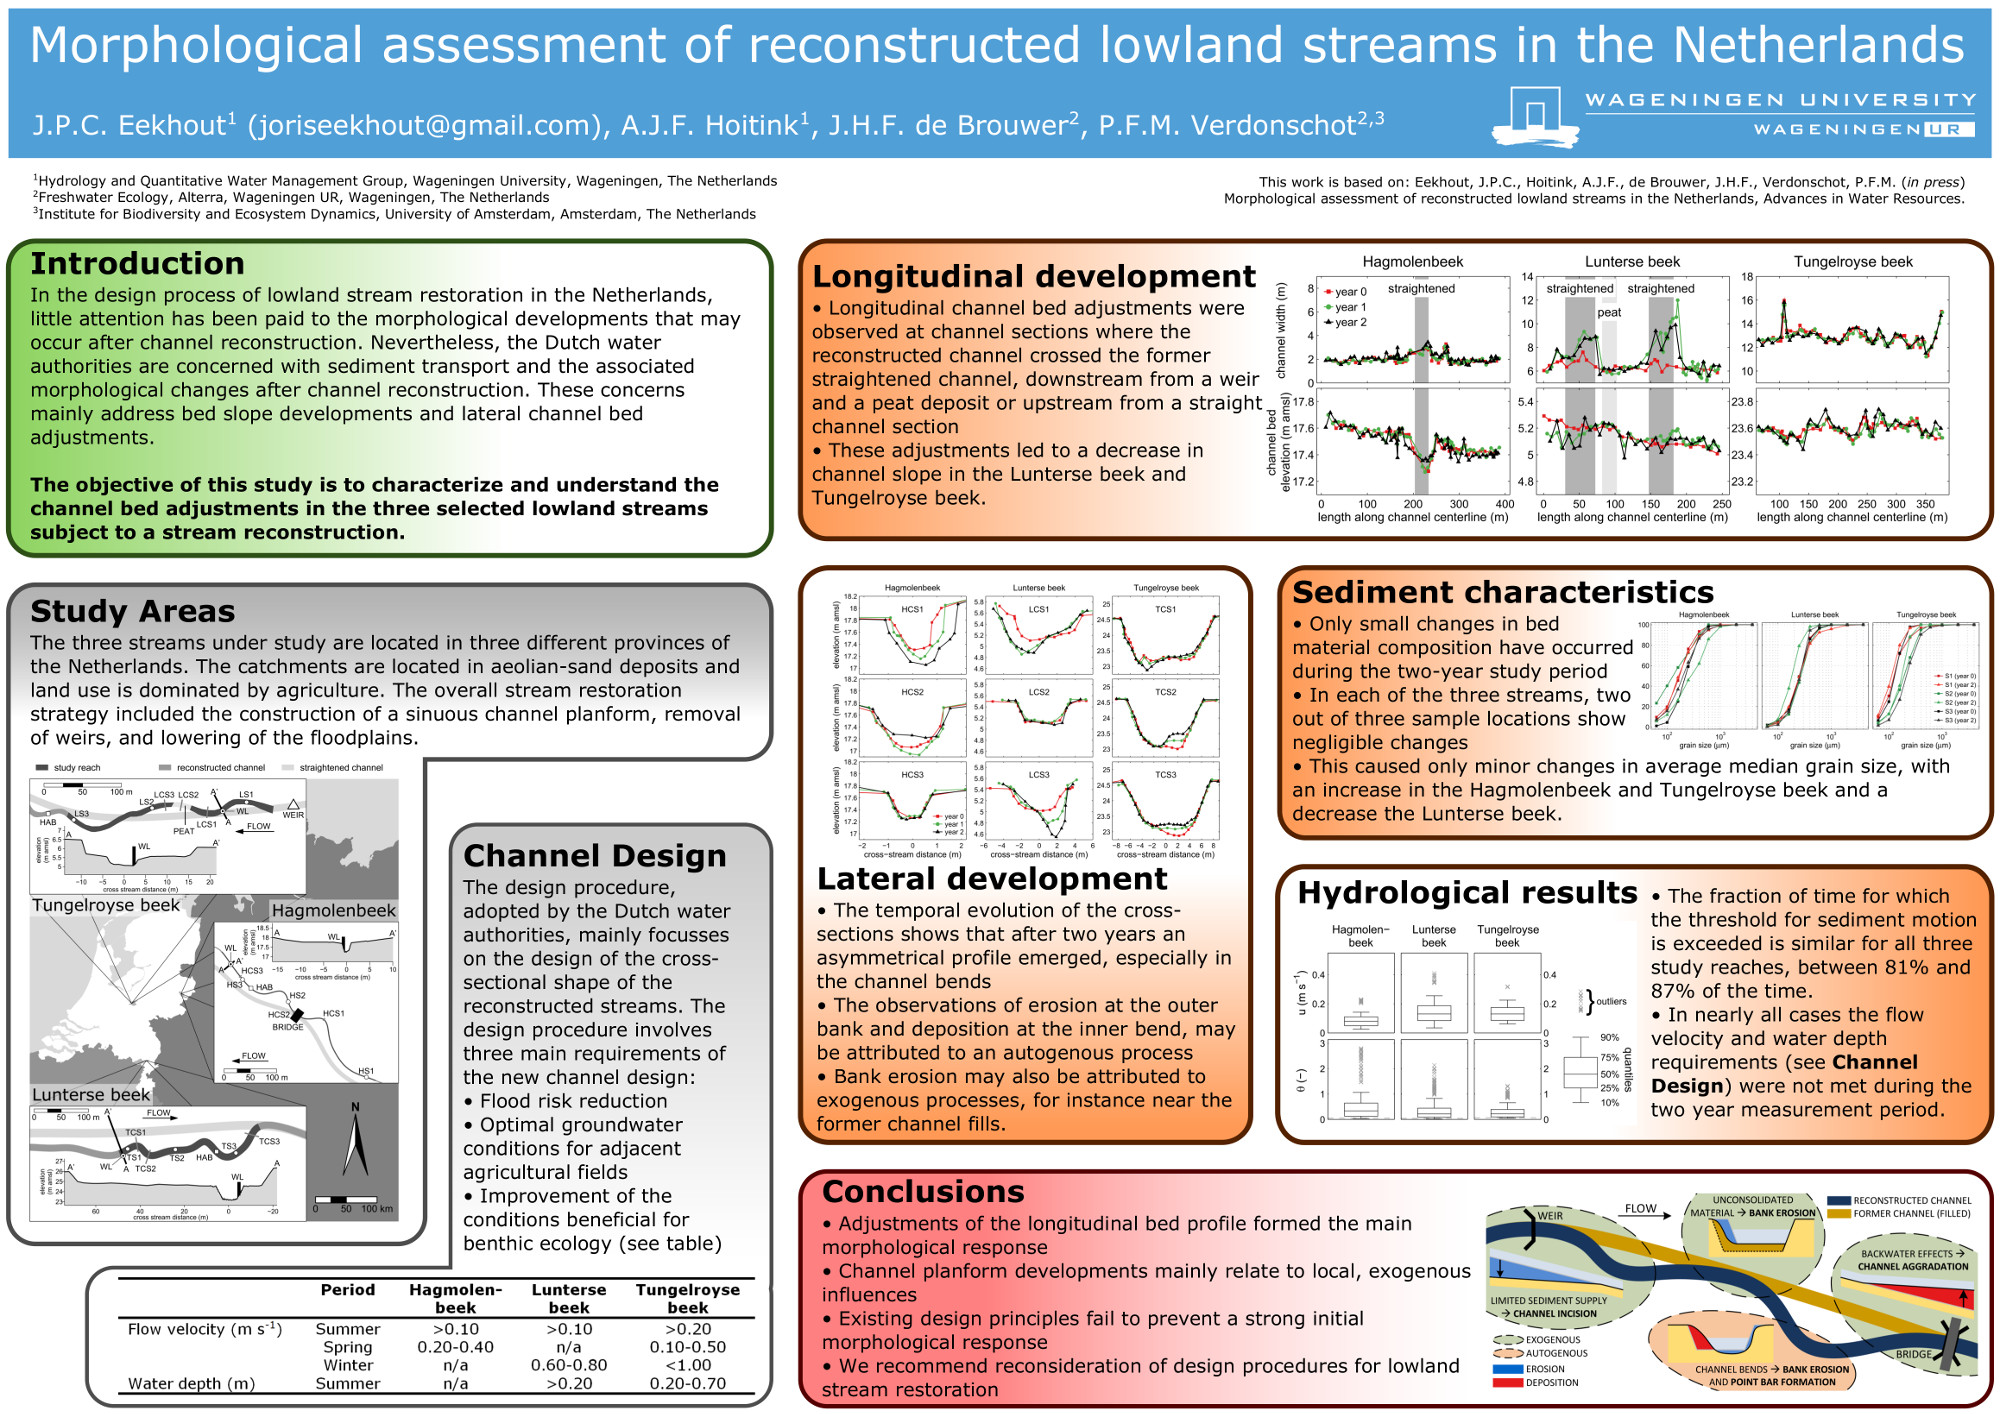 Morphological assessment of reconstructed lowland streams in the Netherlands